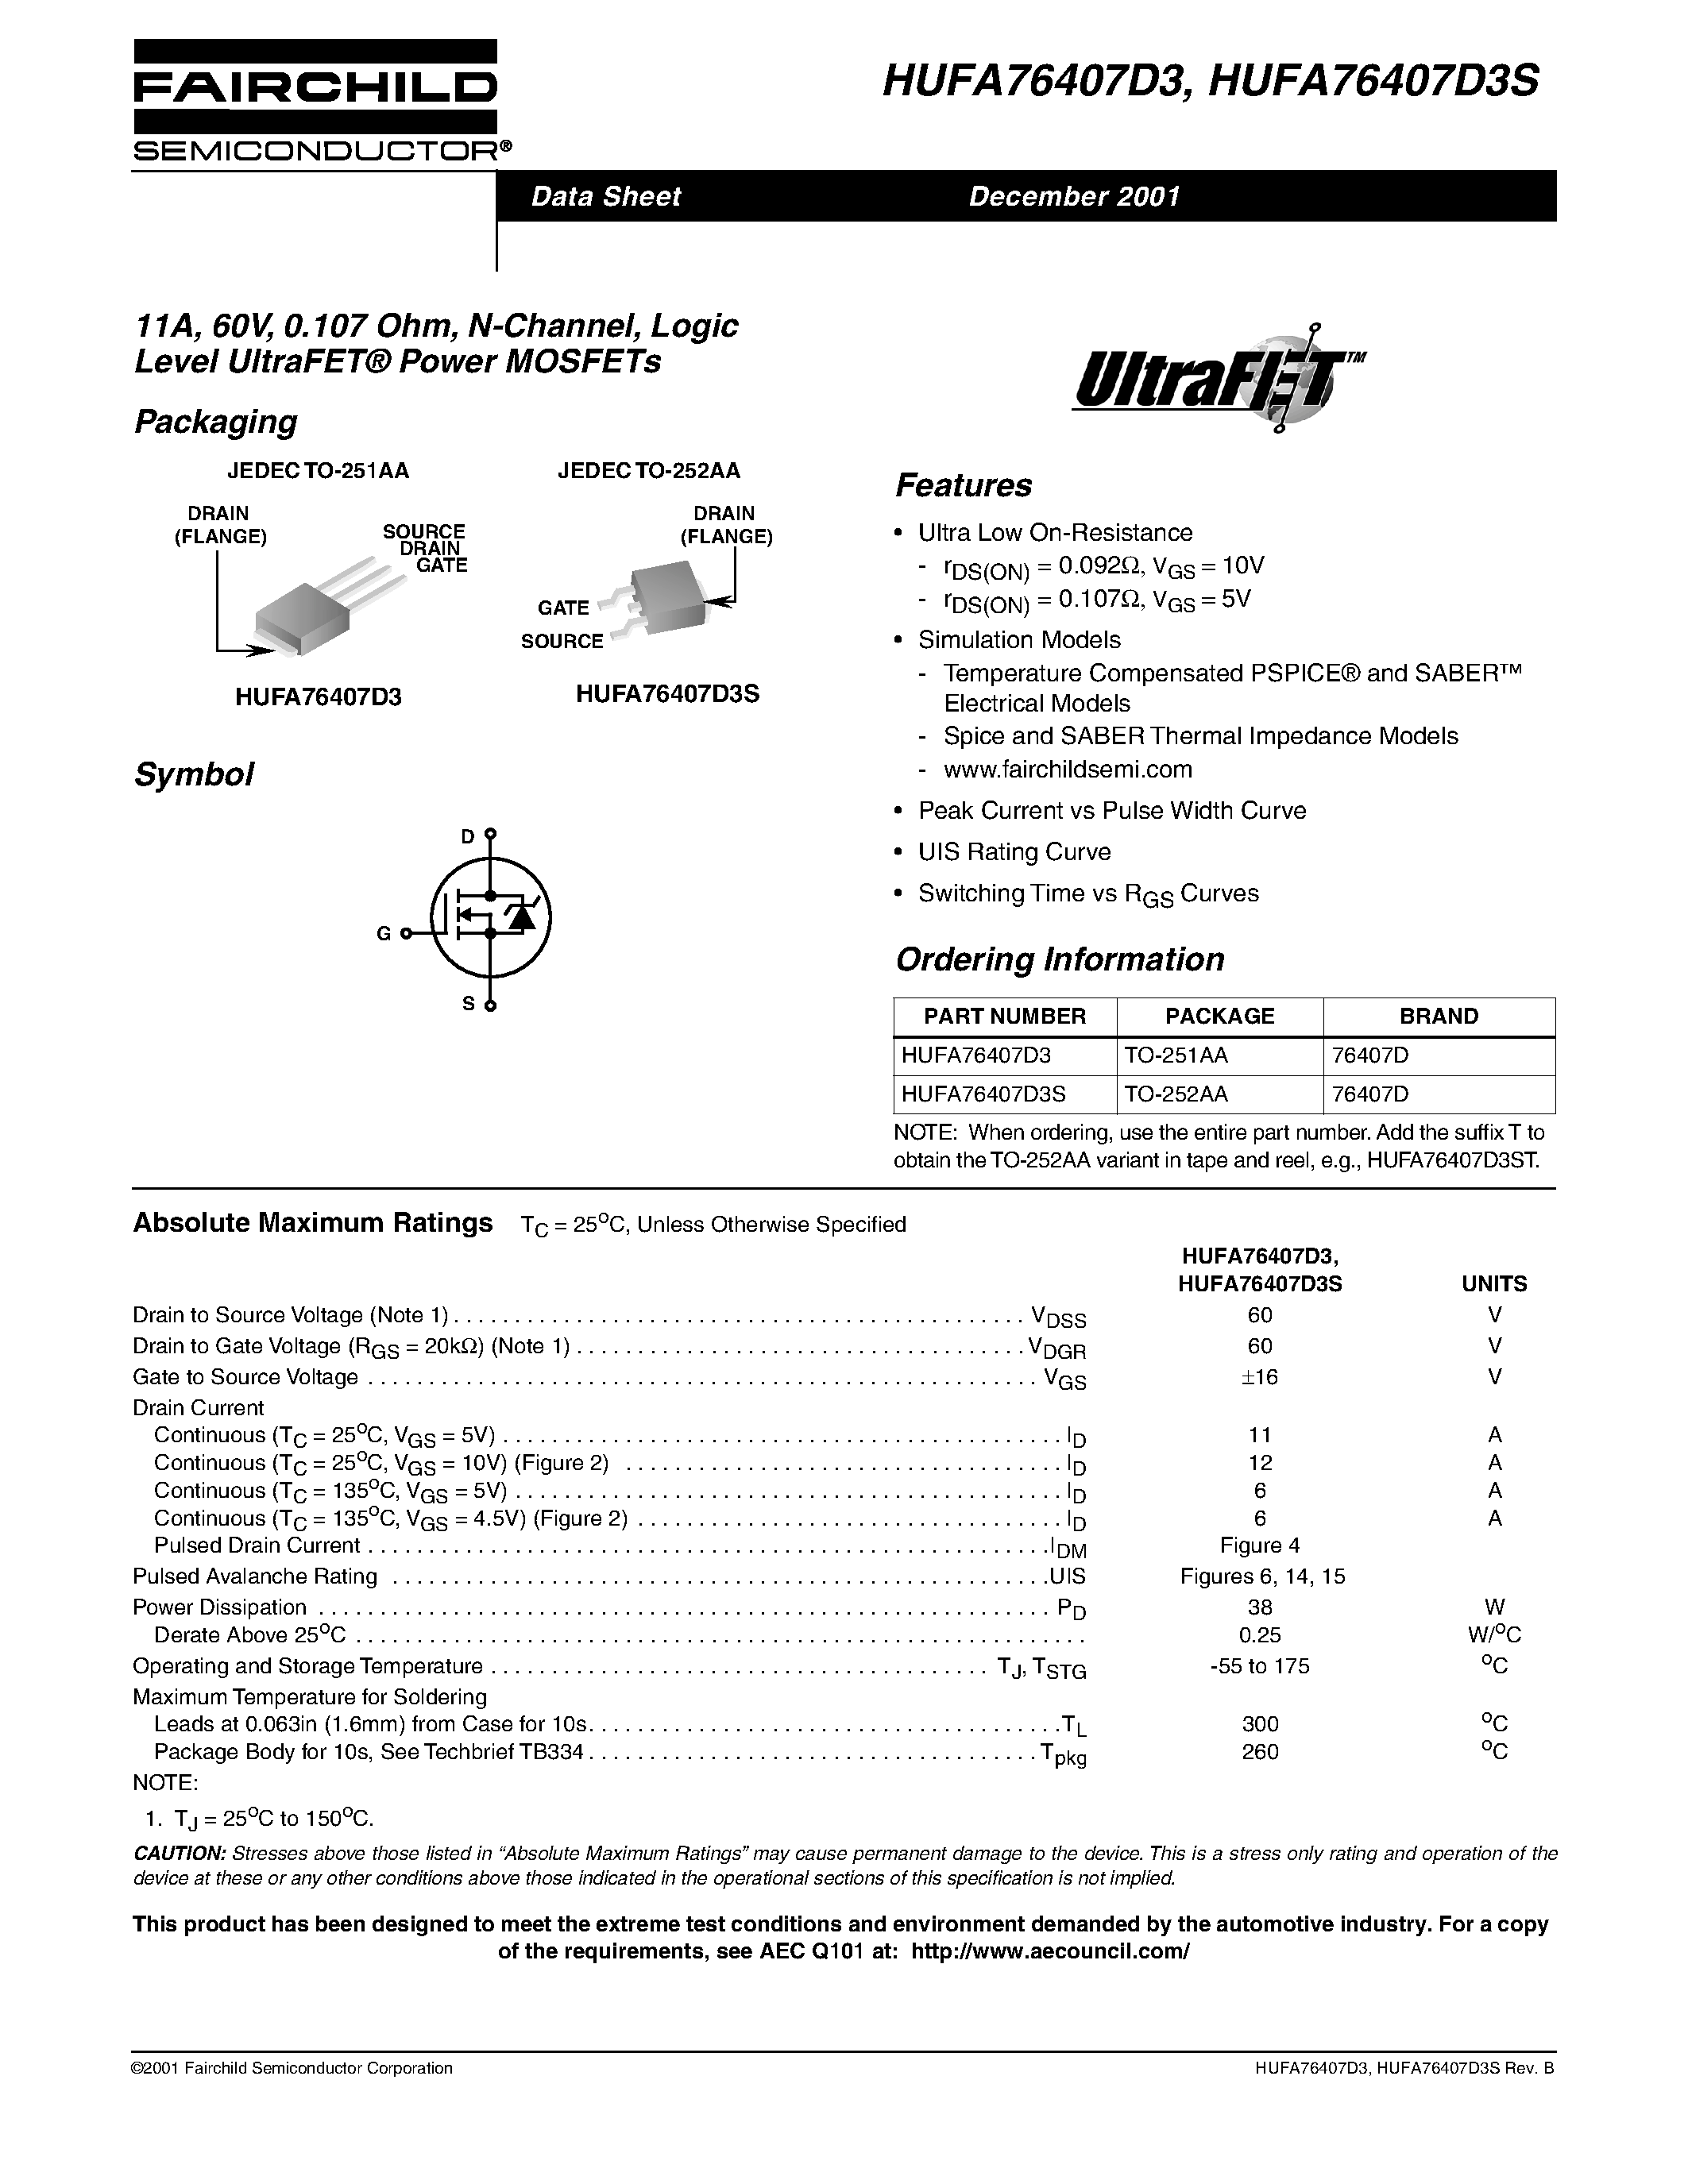 Datasheet HUFA76407D3 - 11A/ 60V/ 0.107 Ohm/ N-Channel/ Logic Level UltraFET Power MOSFETs page 1